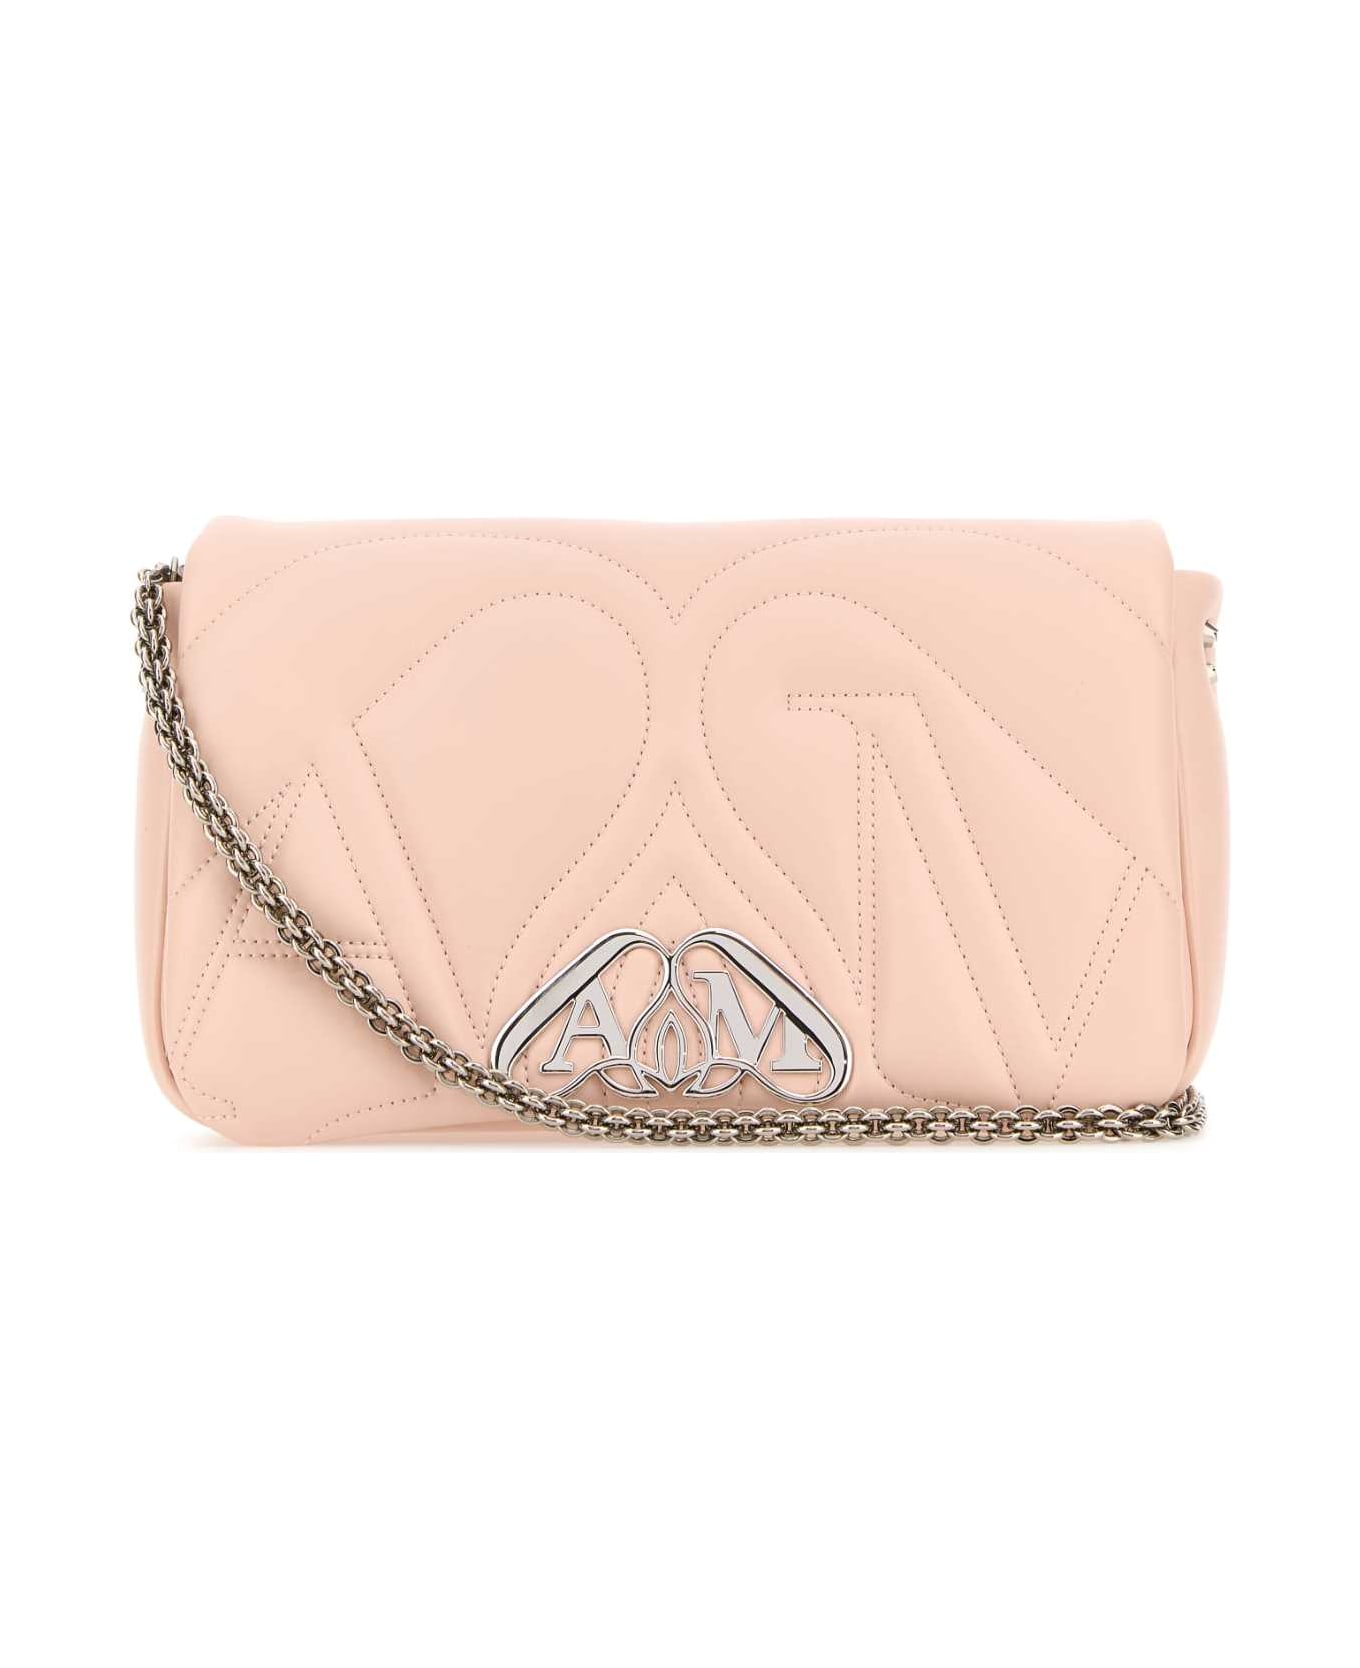 Alexander McQueen Pink Leather Small Seal Shoulder Bag - CLAY